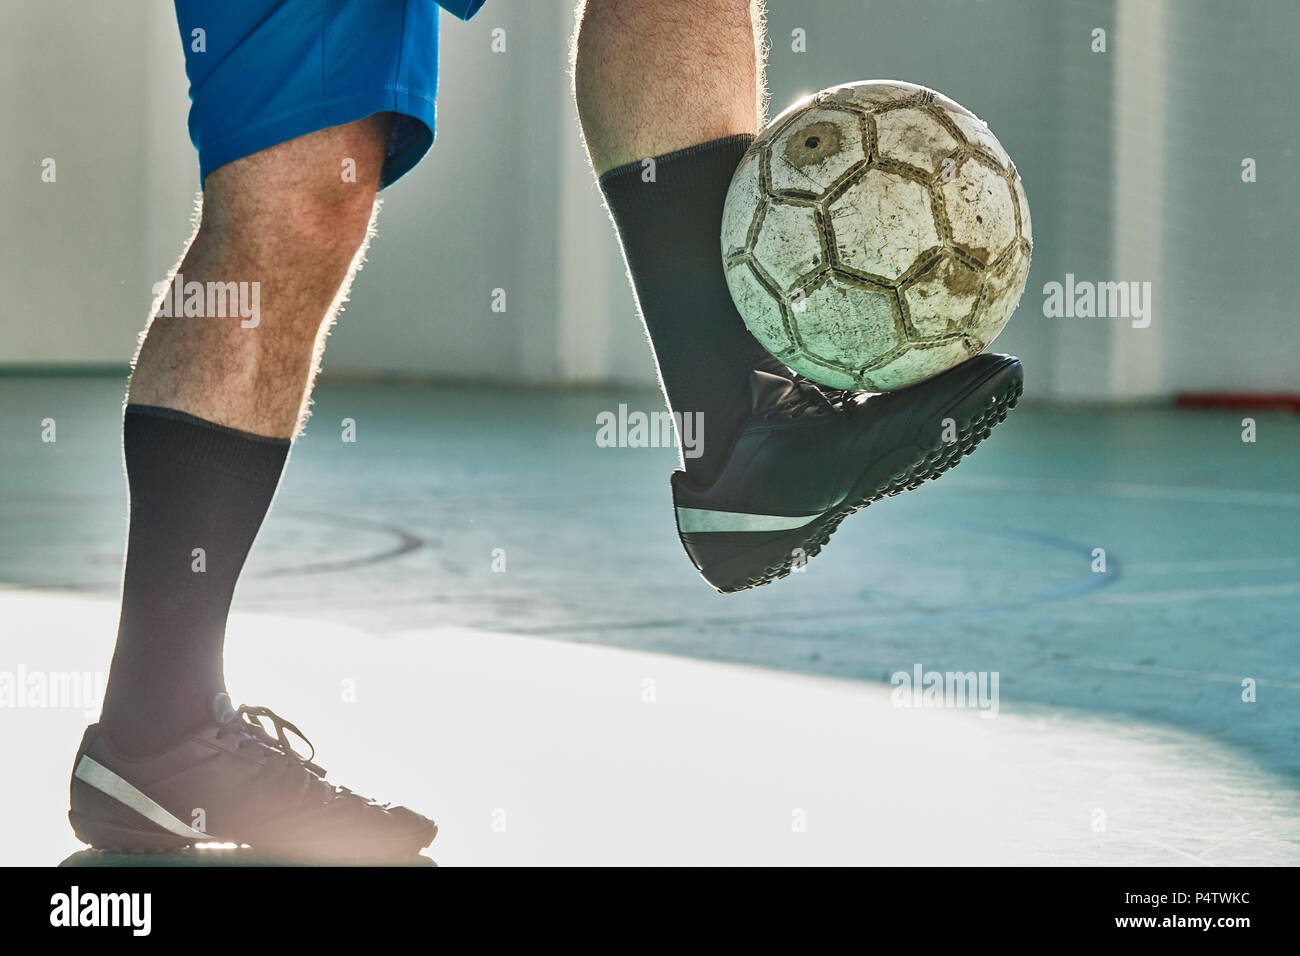 Indoor soccer player balancing the ball Stock Photo